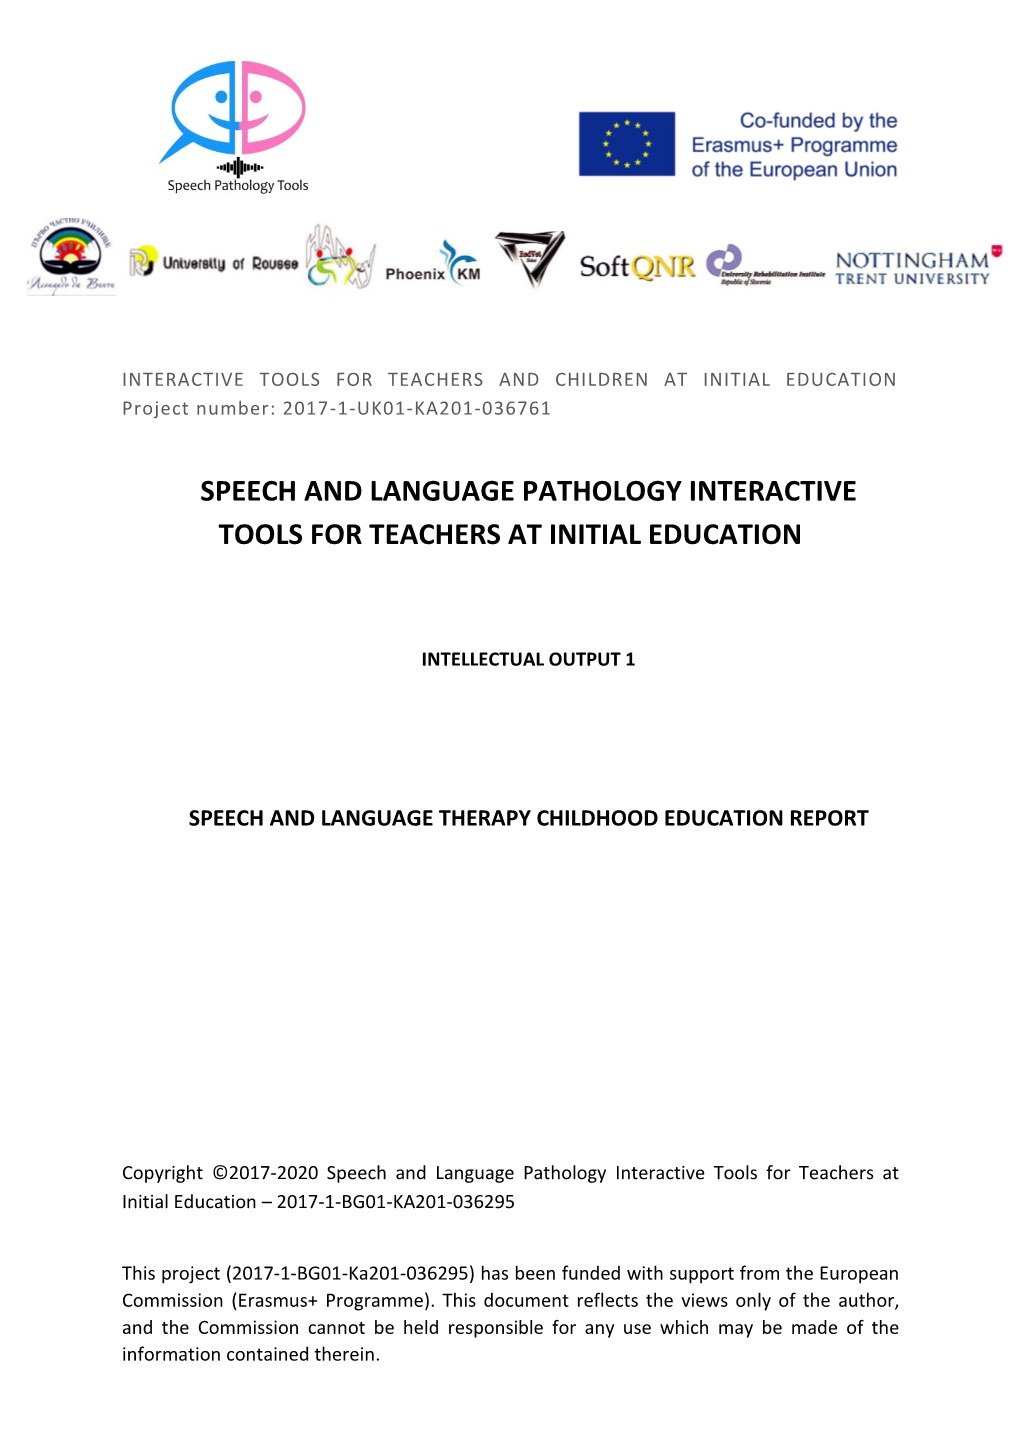 Speech and Language Therapy Childhood Education Report